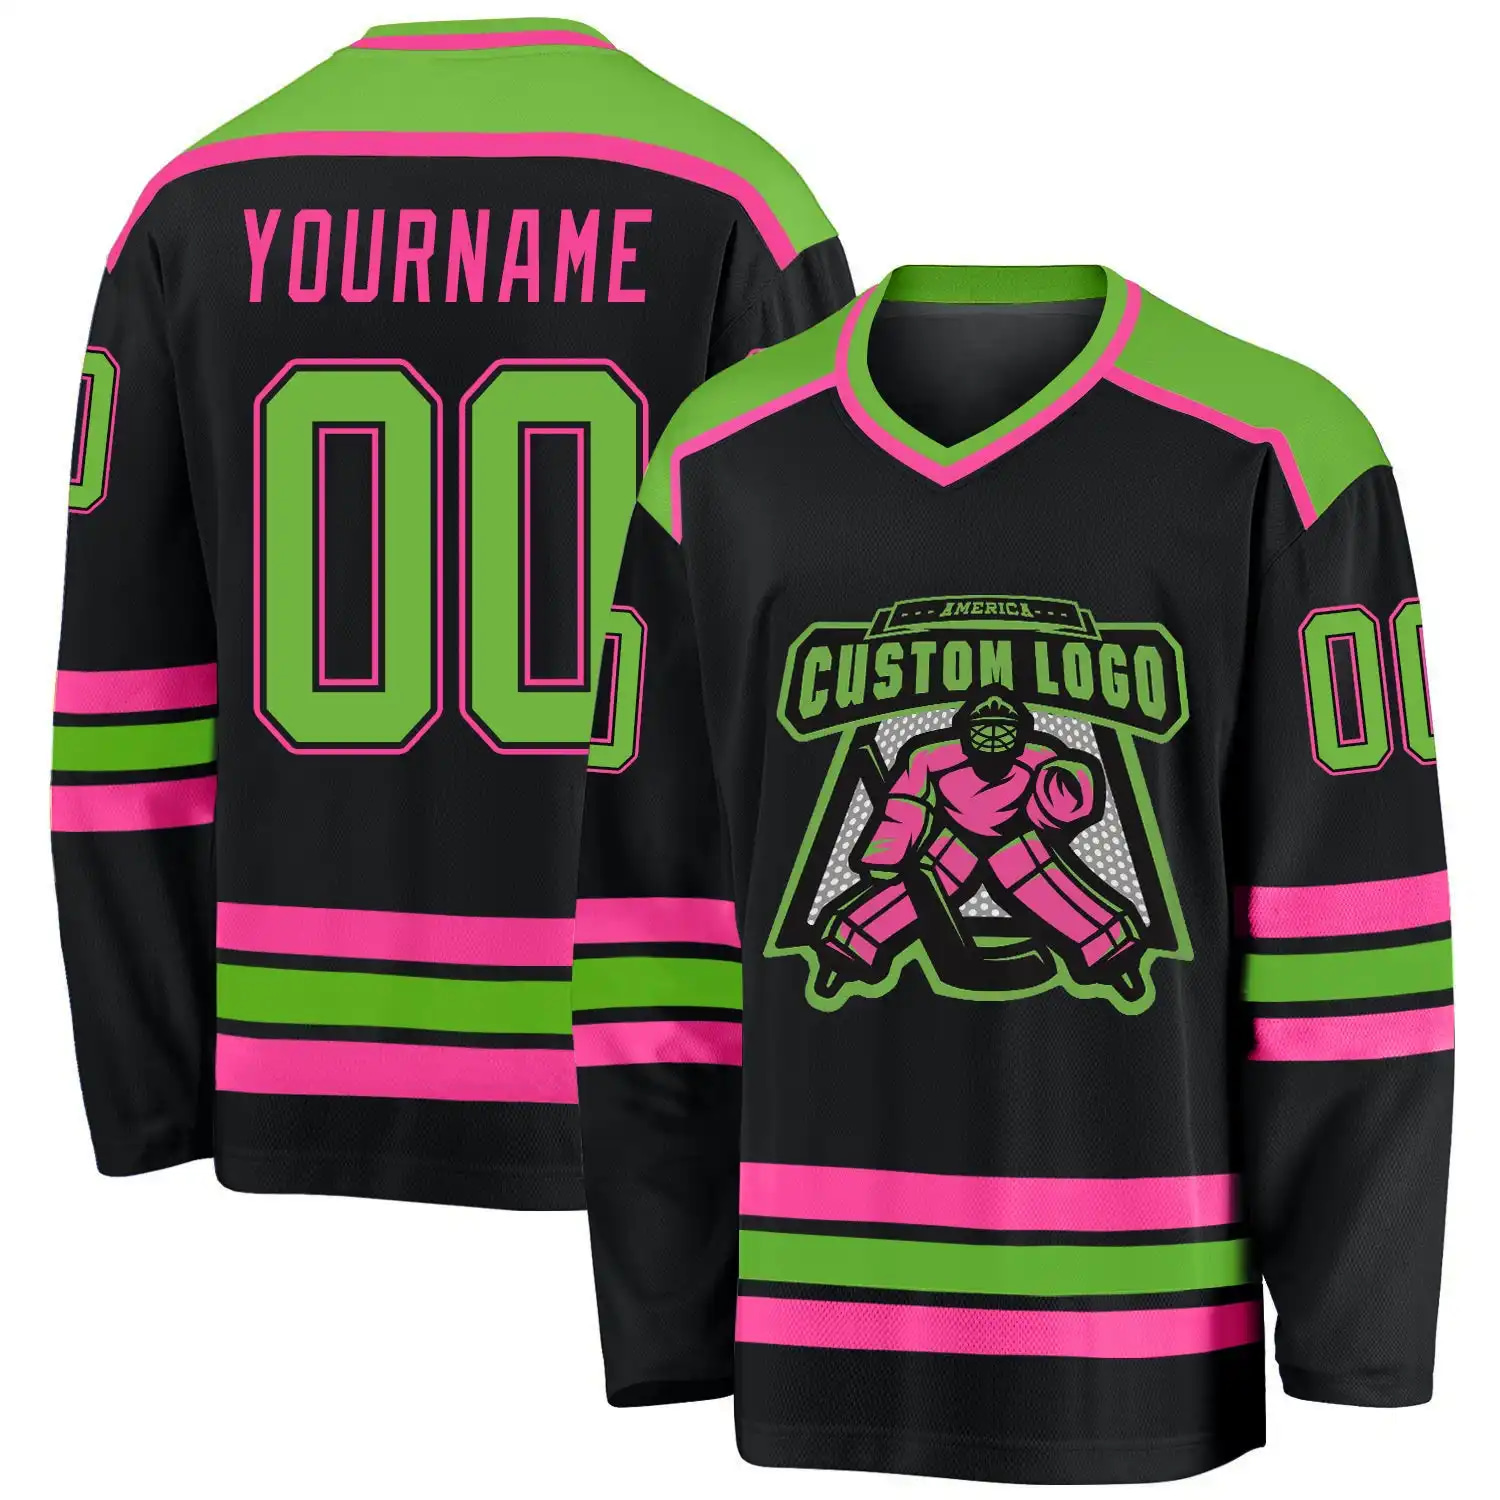 Stitched And Print Black Neon Green-pink Hockey Jersey Custom